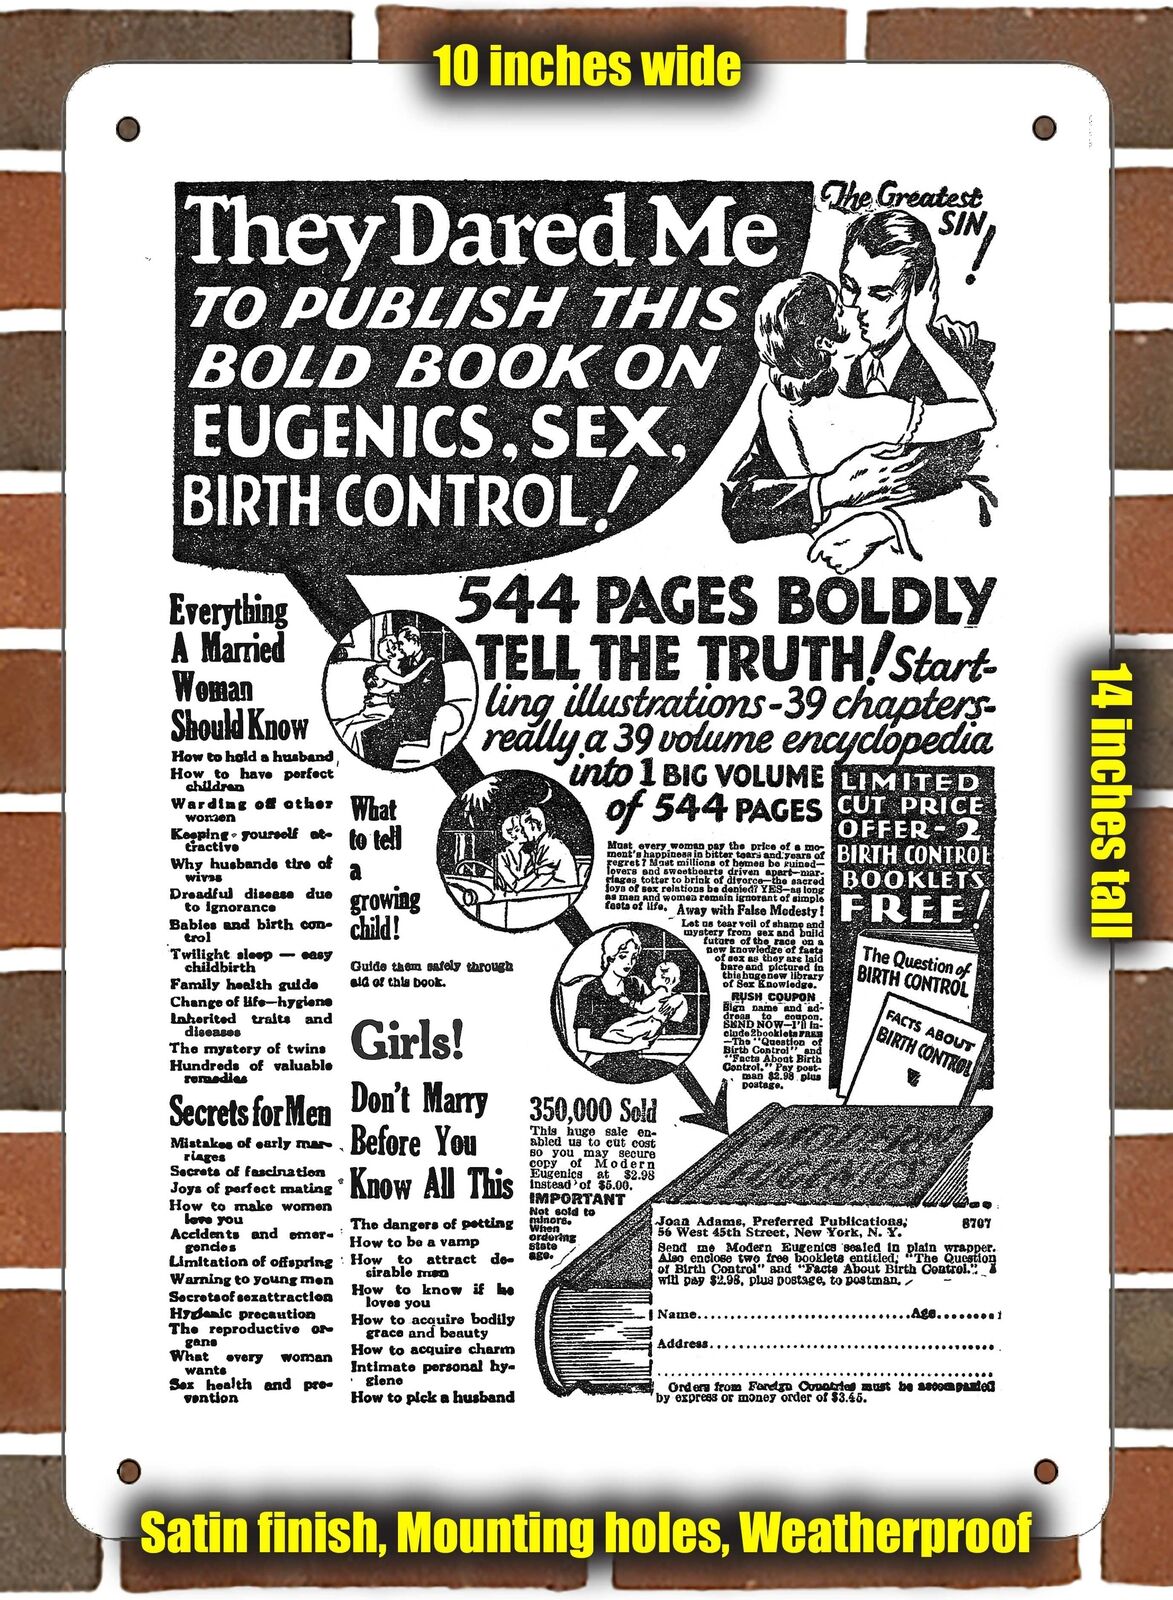 Metal Sign - 1932 Ad for Book on Eugenics and Sex - 10x14 inches